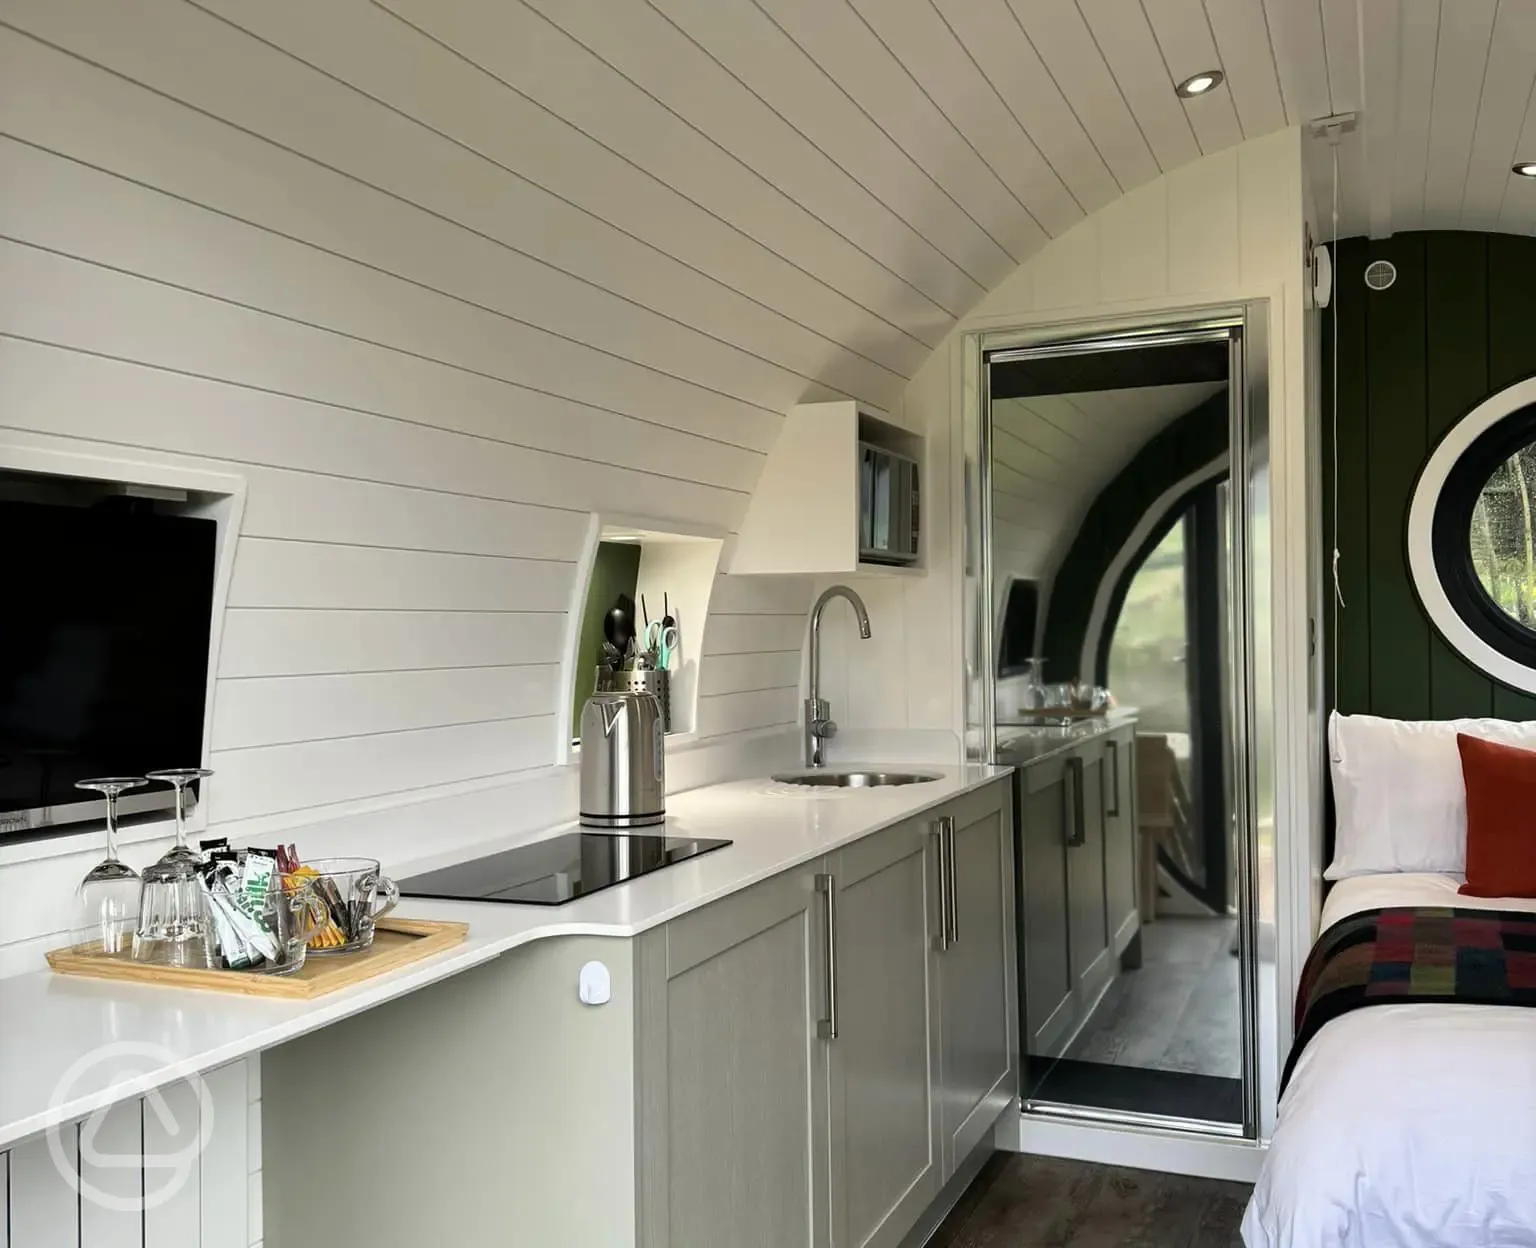 Glamping pod fully equipped kitchenette